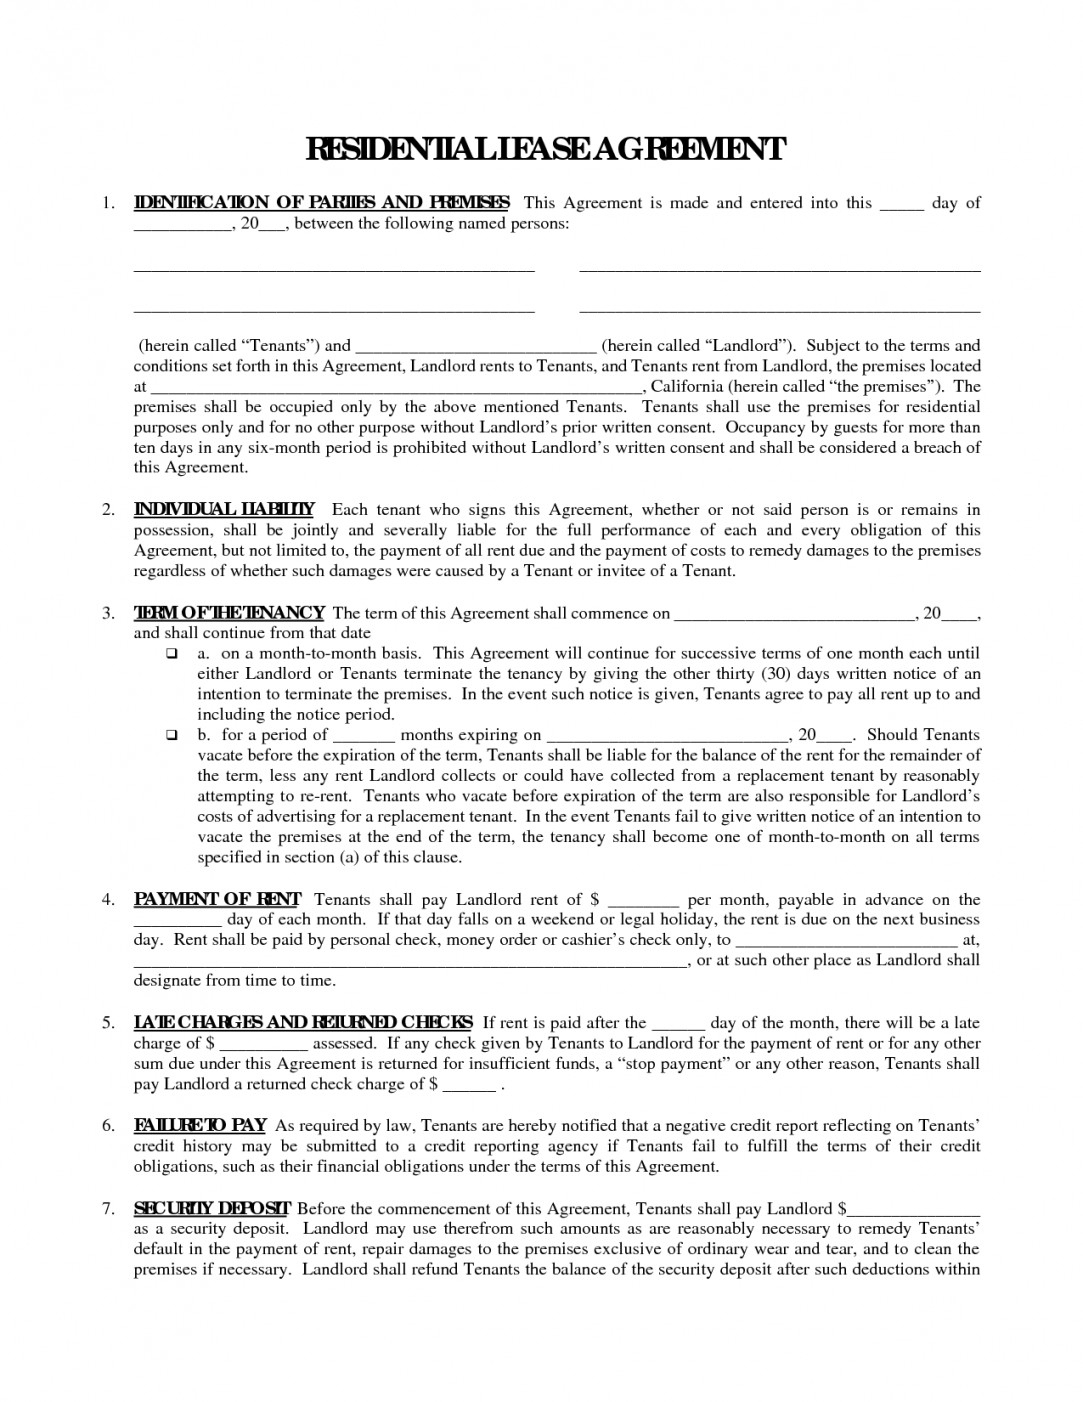 Free Florida Residential Lease Agreement Template | Lostranquillos - Free Printable Florida Residential Lease Agreement